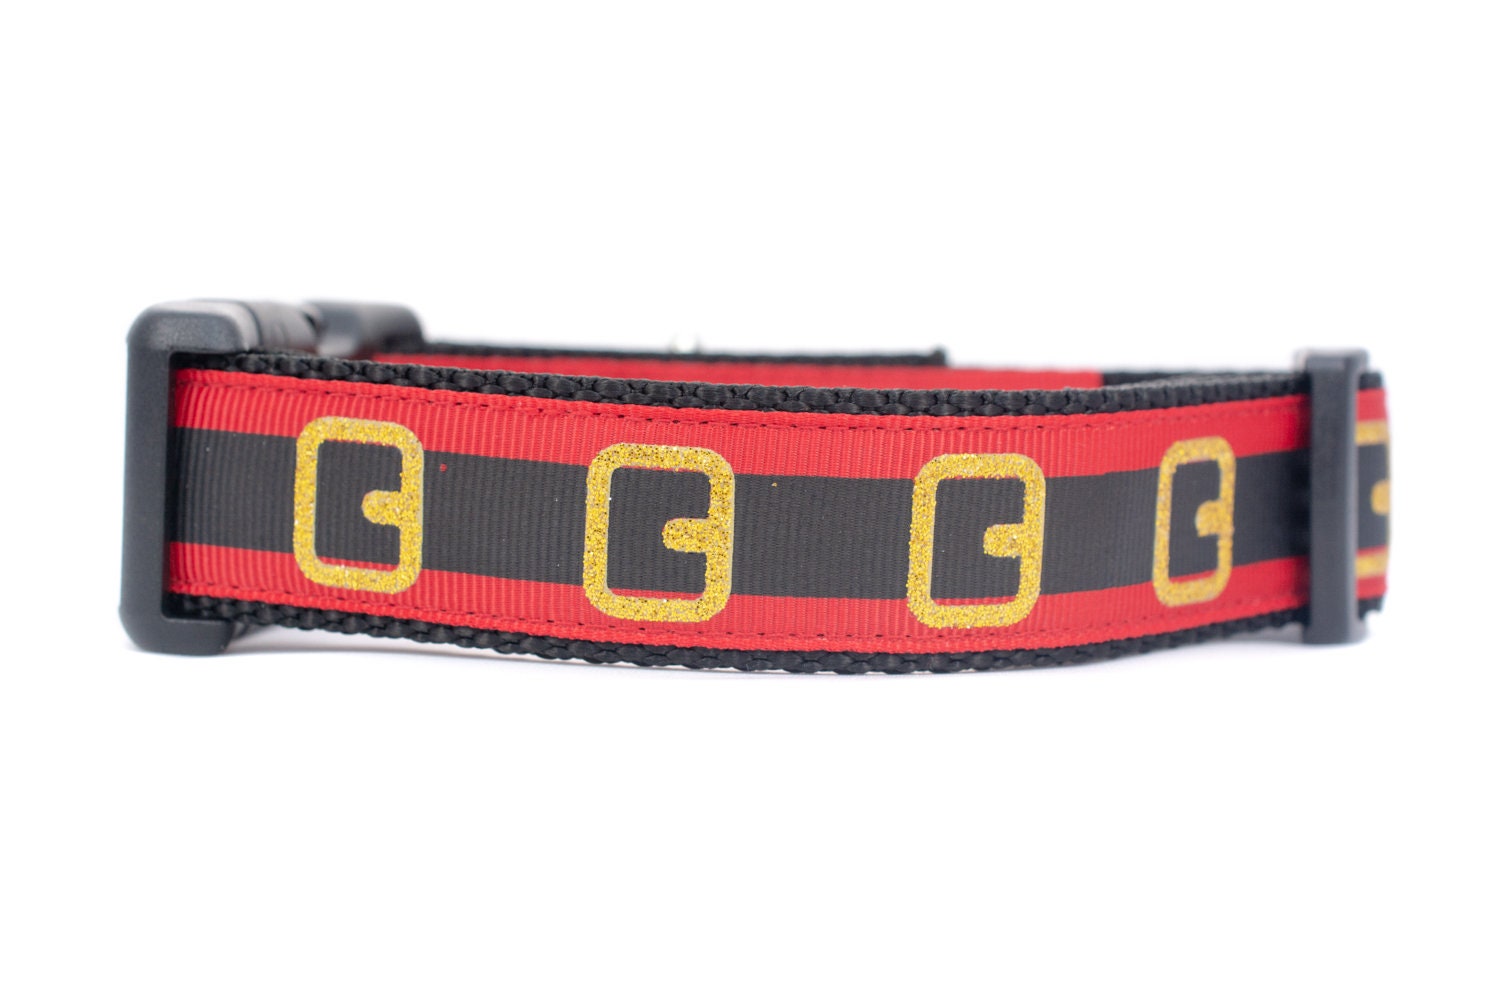 Gucci Inspired Dog Collar, Leash and Seatbelt Tether Green & Red